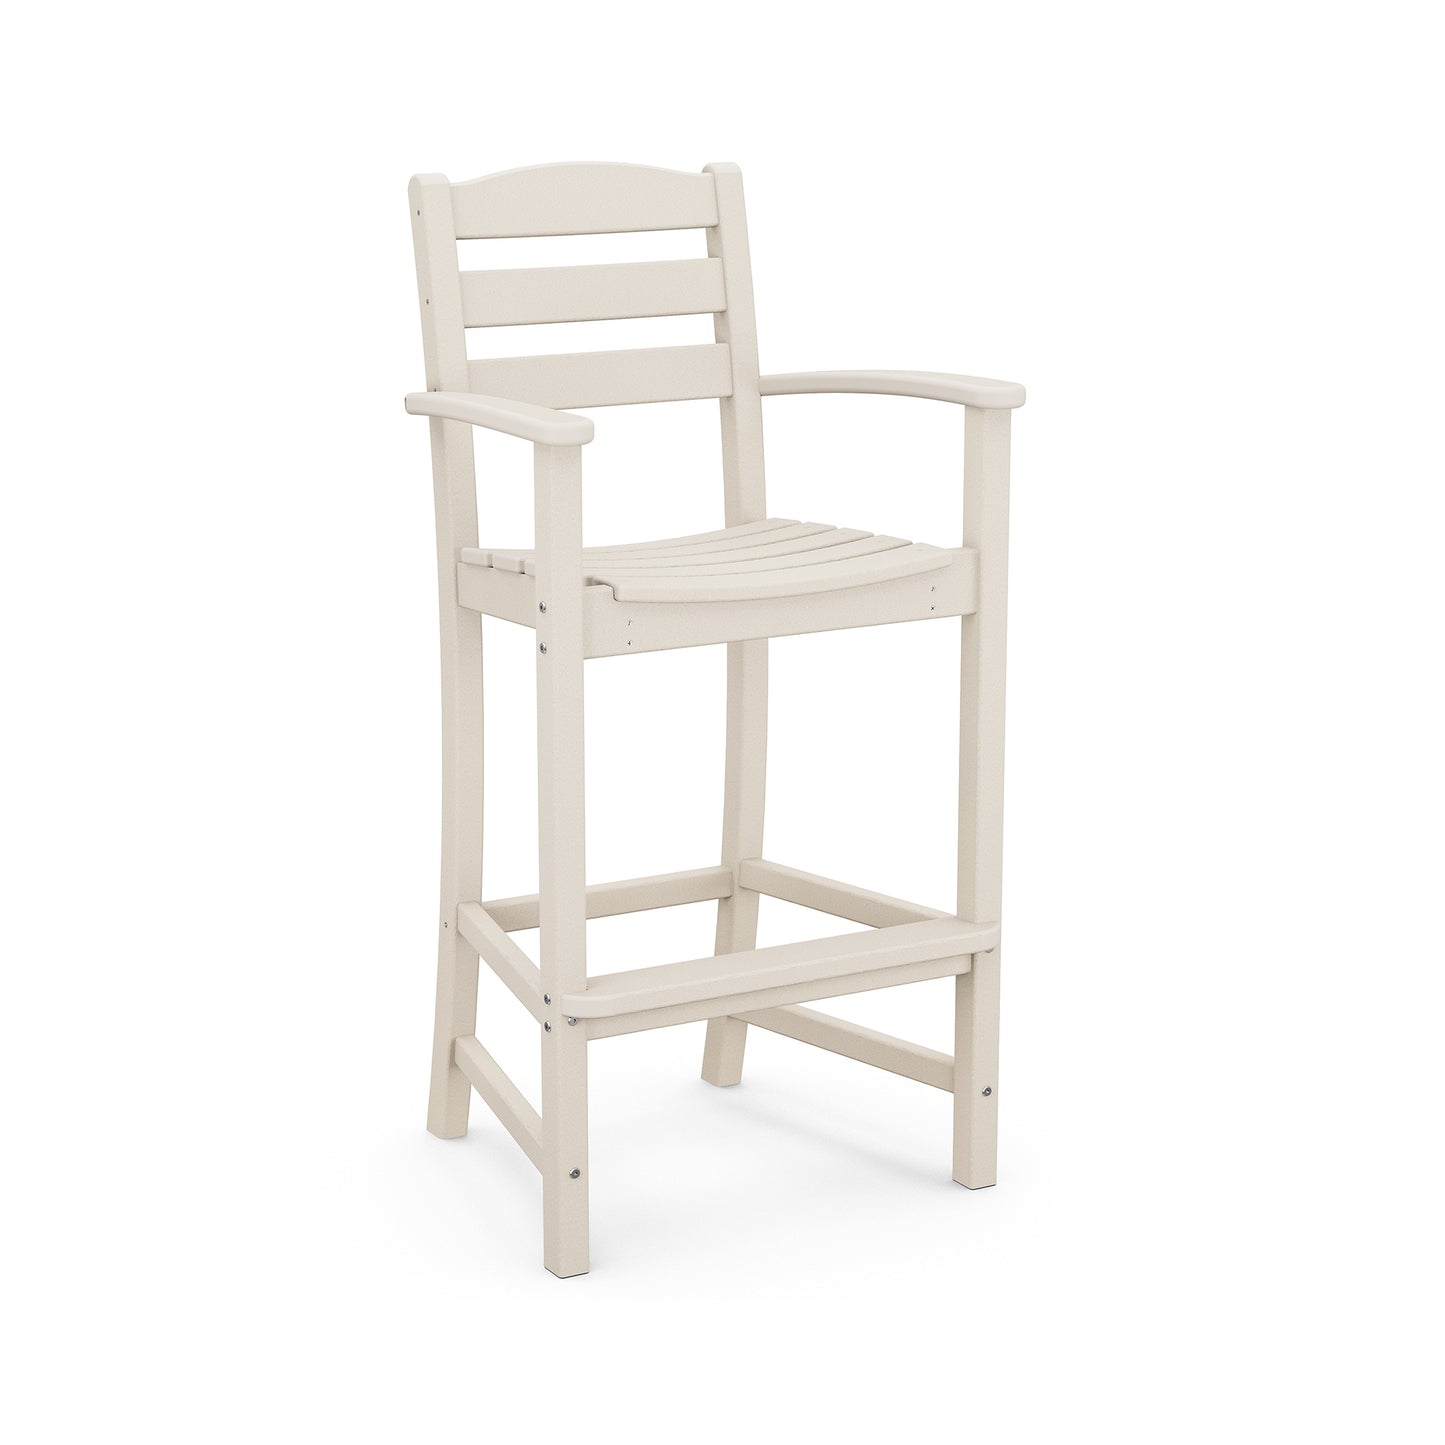 A cream-colored, high-backed POLYWOOD La Casa Cafe Outdoor Bar Arm Chair with slatted seat and flat armrests, set against a plain white background.